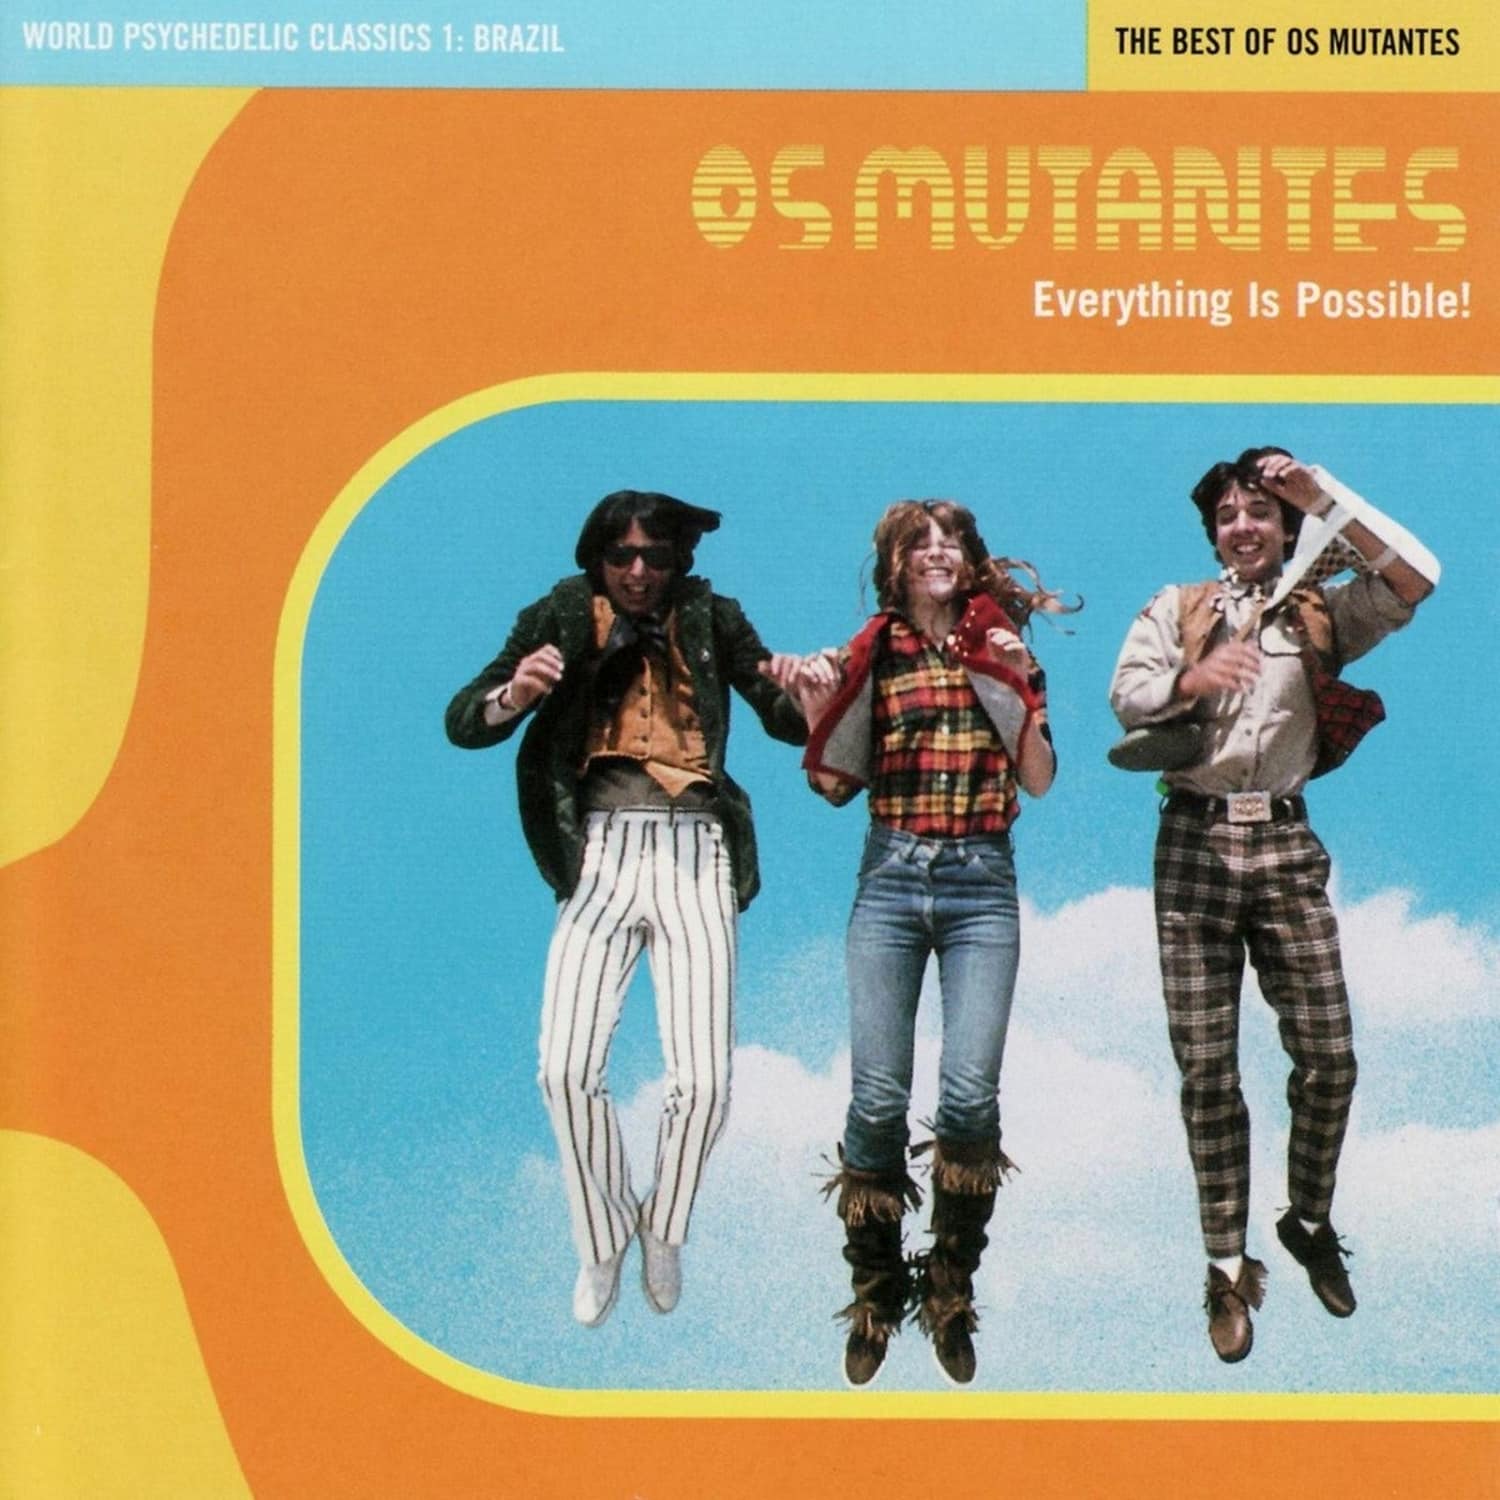 Os Mutantes - EVERYTHING IS POSSIBLE: BEST OF 